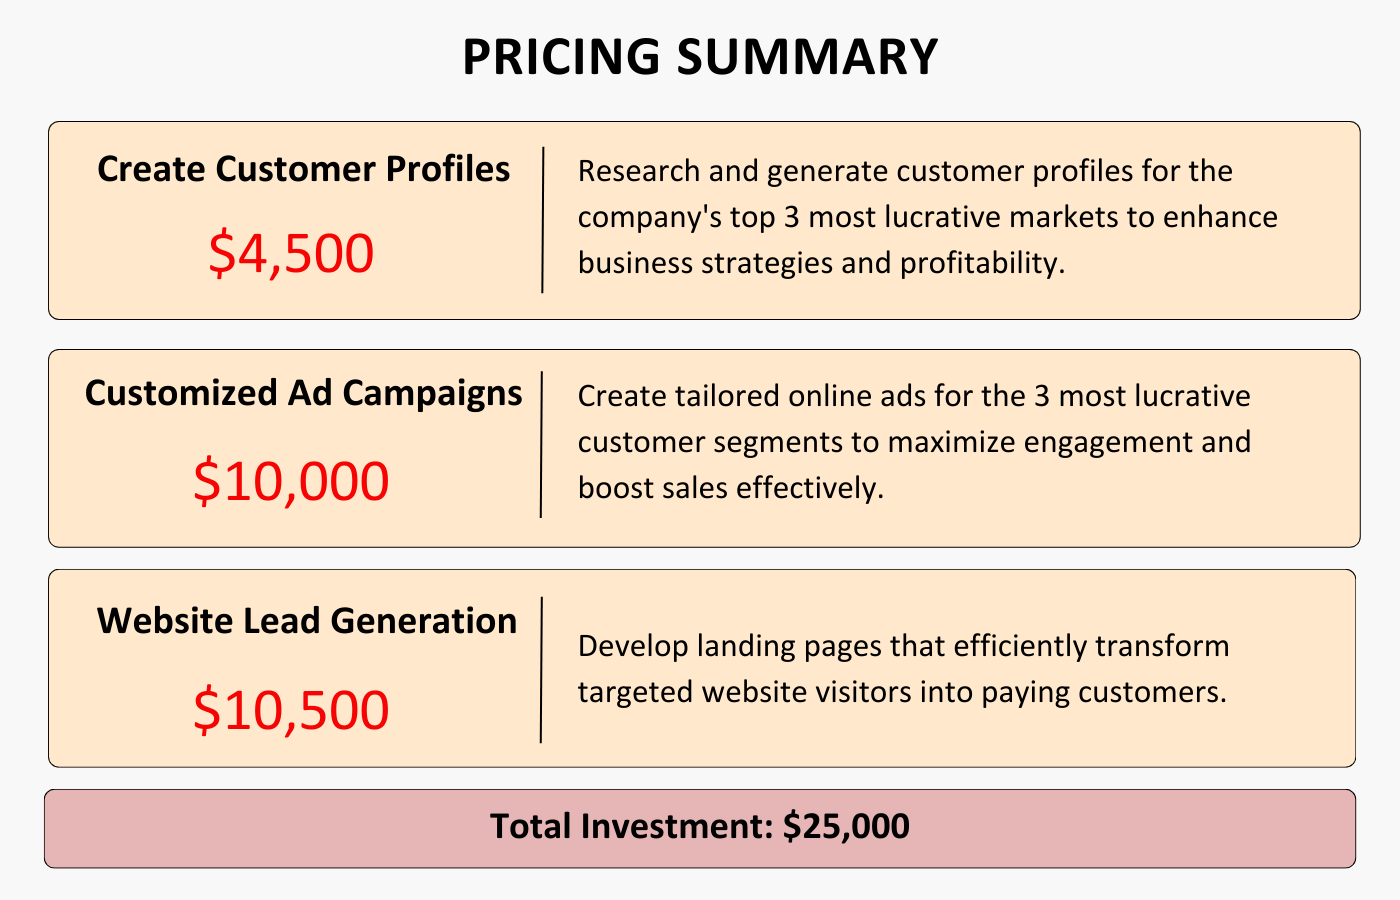 Marketing proposal pricing summary example